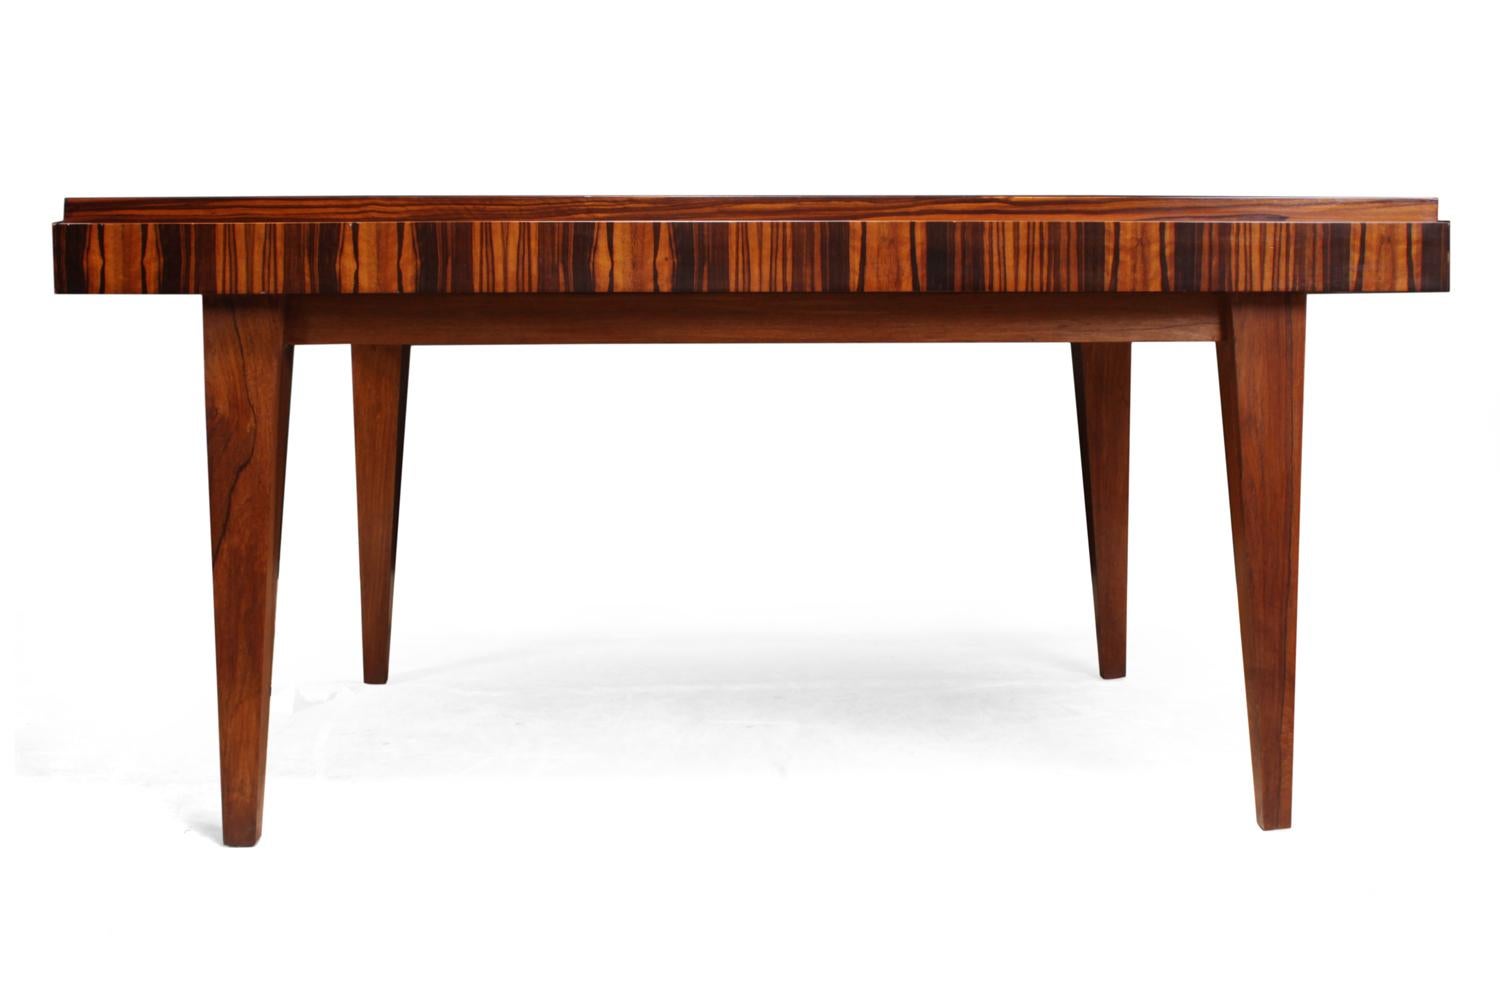 French Macassar dining table
This transitional between Art Deco and midcentury, produced early 1950s in Macassar ebony with rosewood base dining table has a drawer either end has been fully restored and hand polished.

Age: 1950

Style: